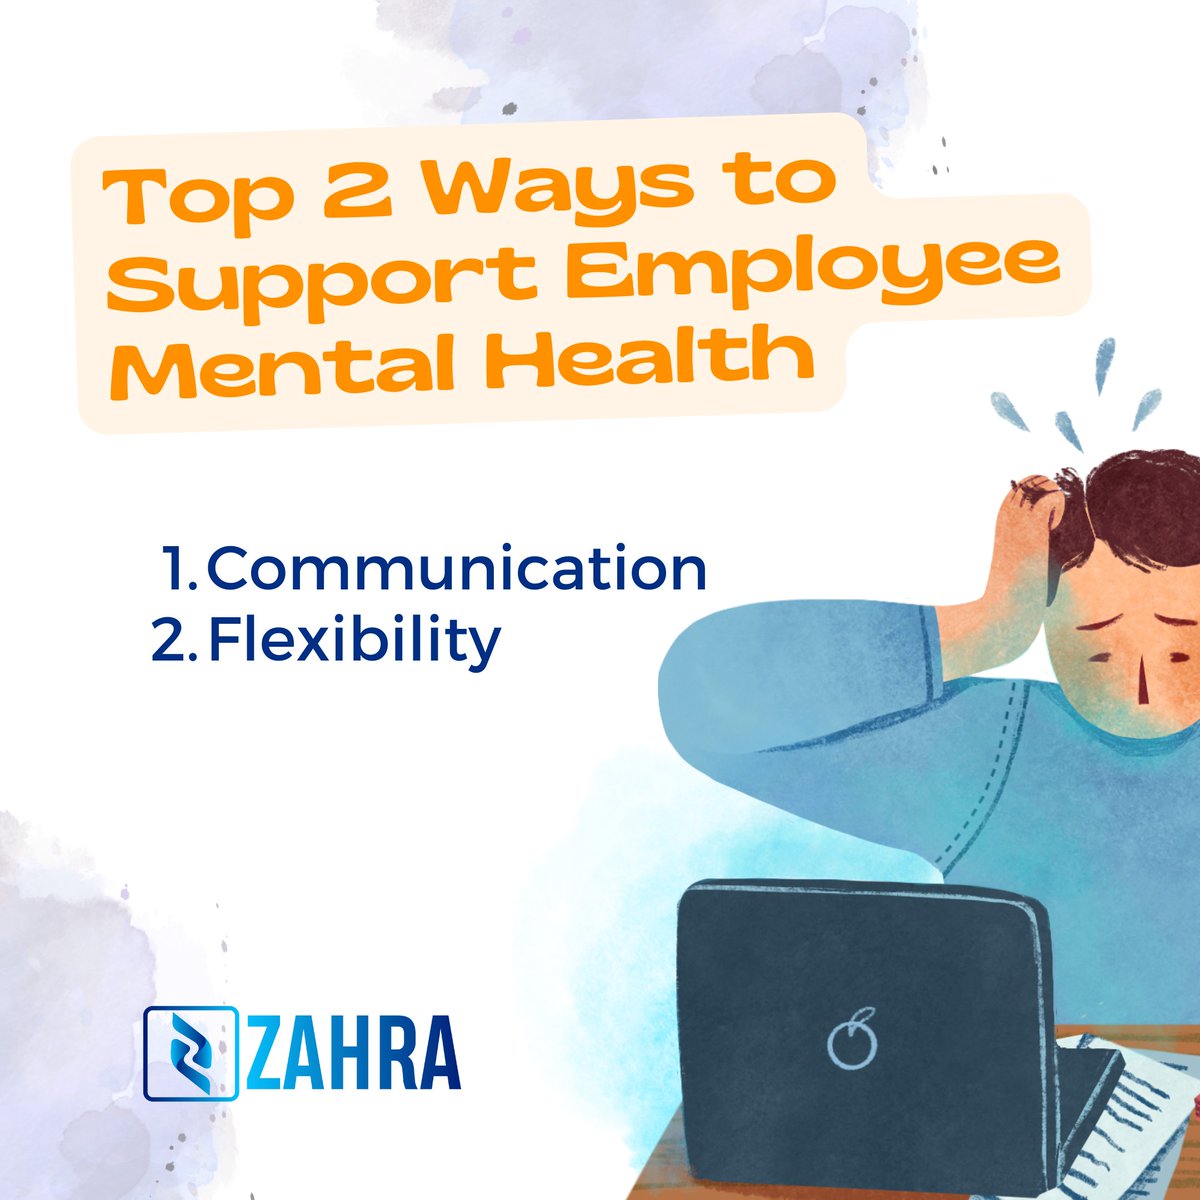 Employee mental health matters, and there are powerful ways to support it in the workplace. 

Here are the top 2 ways to foster a supportive environment:

#OpenCommunication #FlexibilityMatters #WorkLifeBalance #MentalHealthSupport #PositiveWorkEnvironment #ZAHRA #Canada #GTA